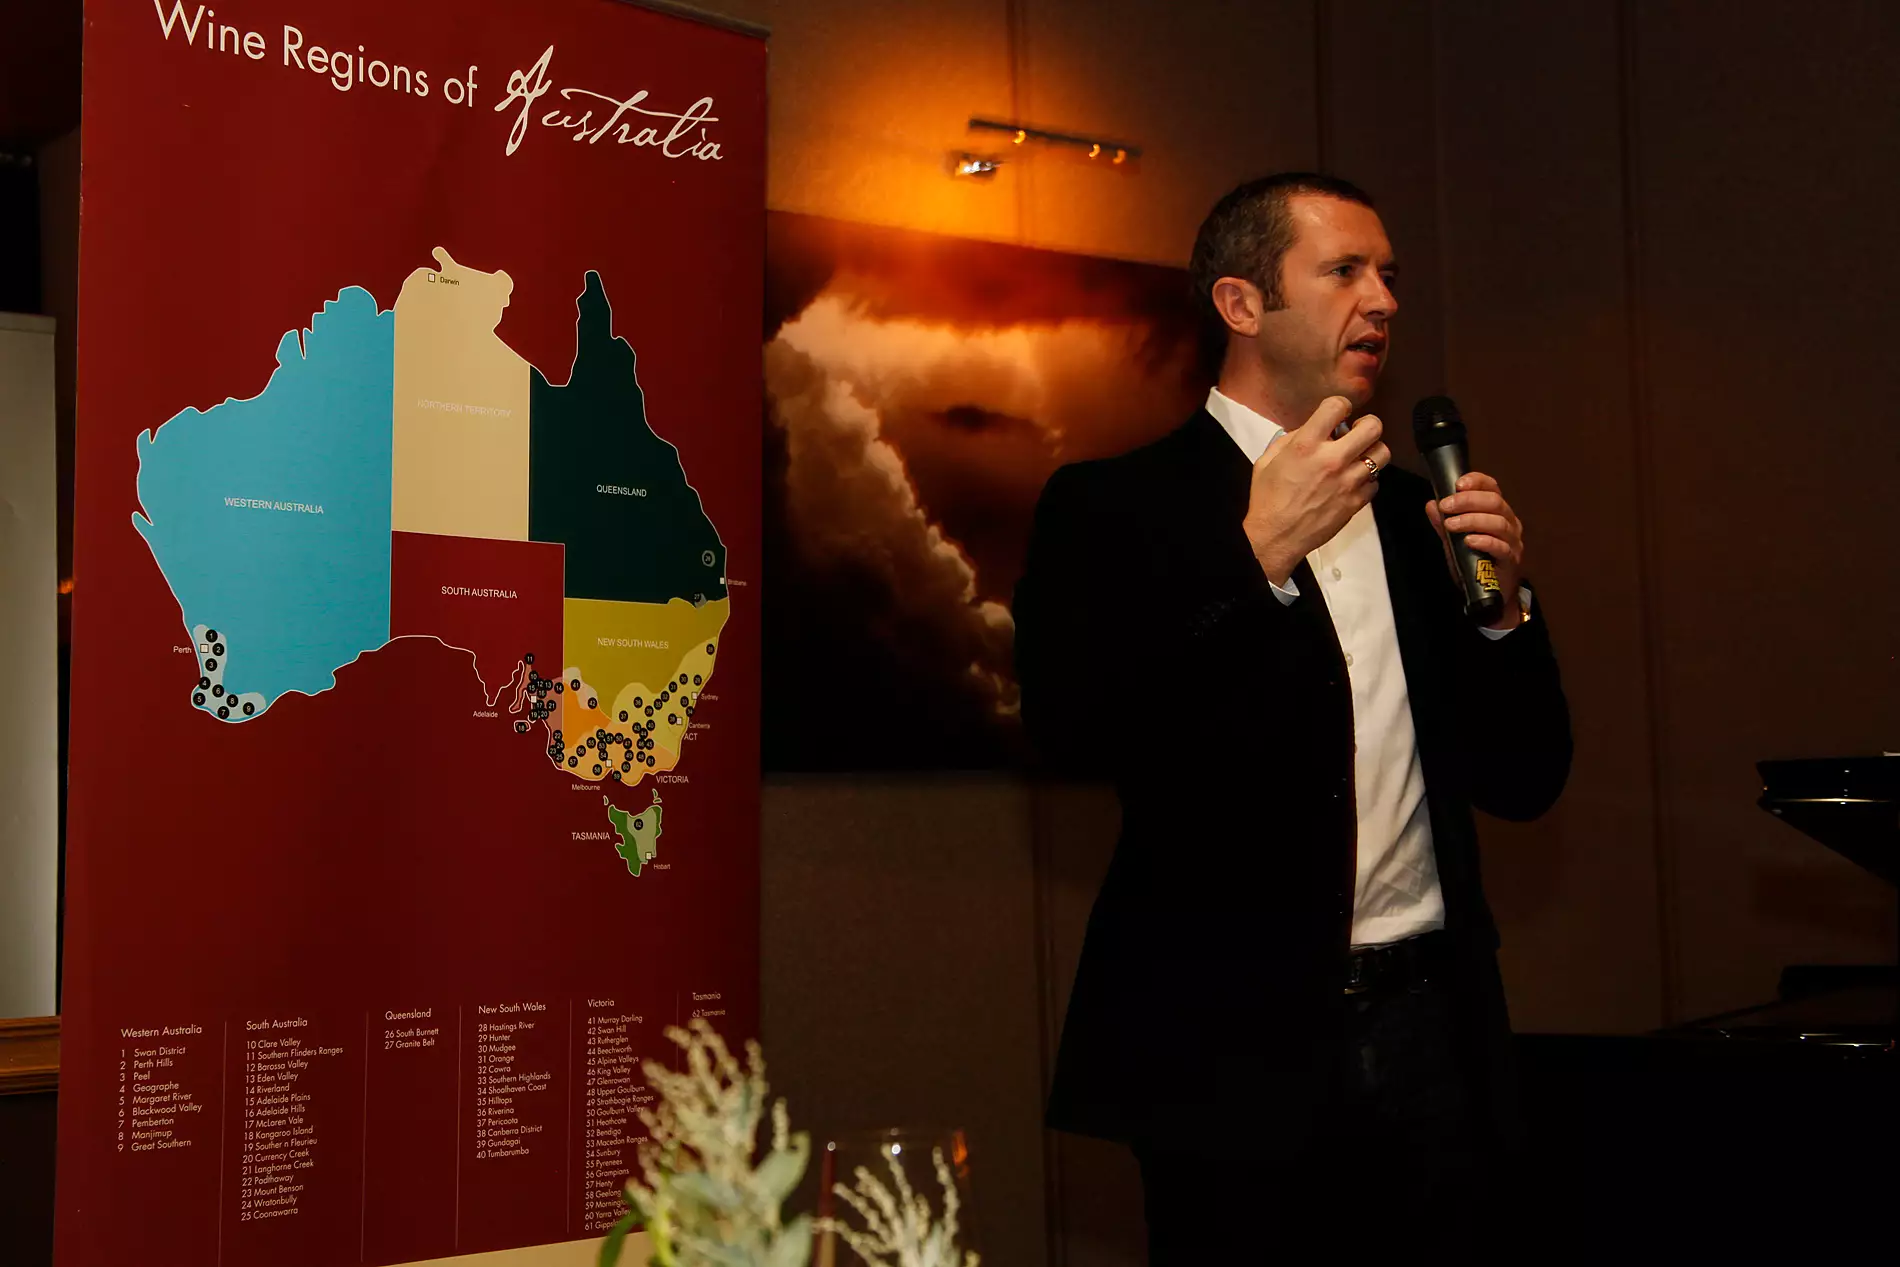 Bringing boutique New World wine to Europe: how Bradley Mitton is building networks through wine tasting and gastronomical events